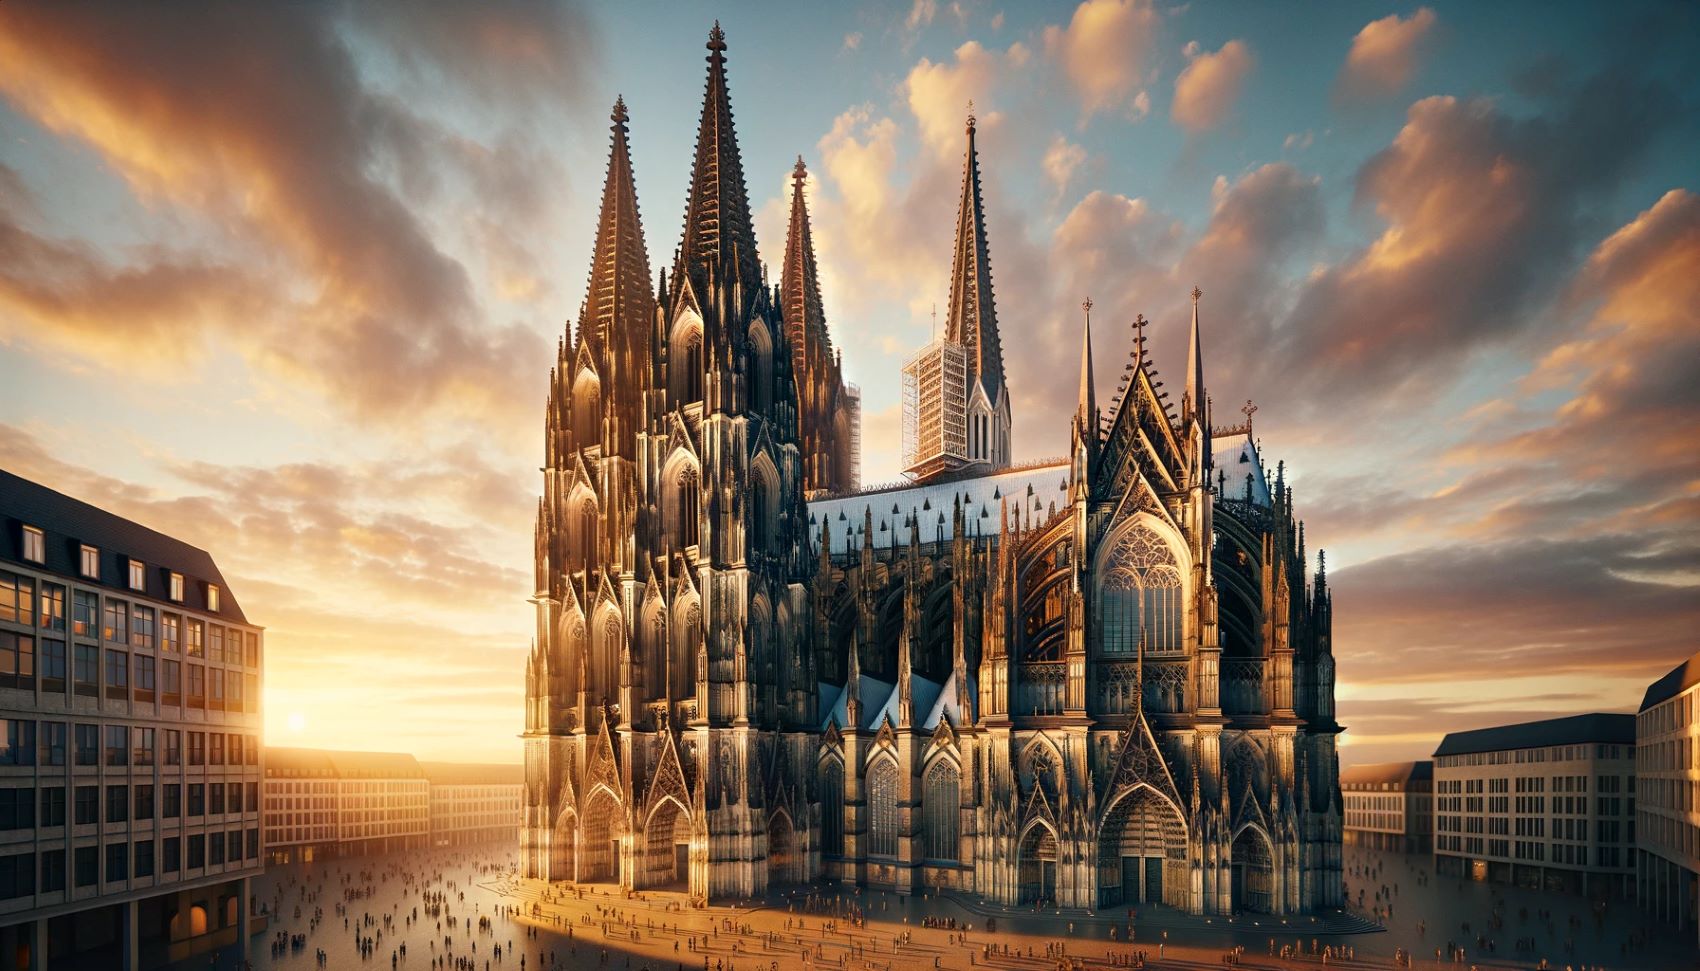 What Is The Cologne Cathedral Known For